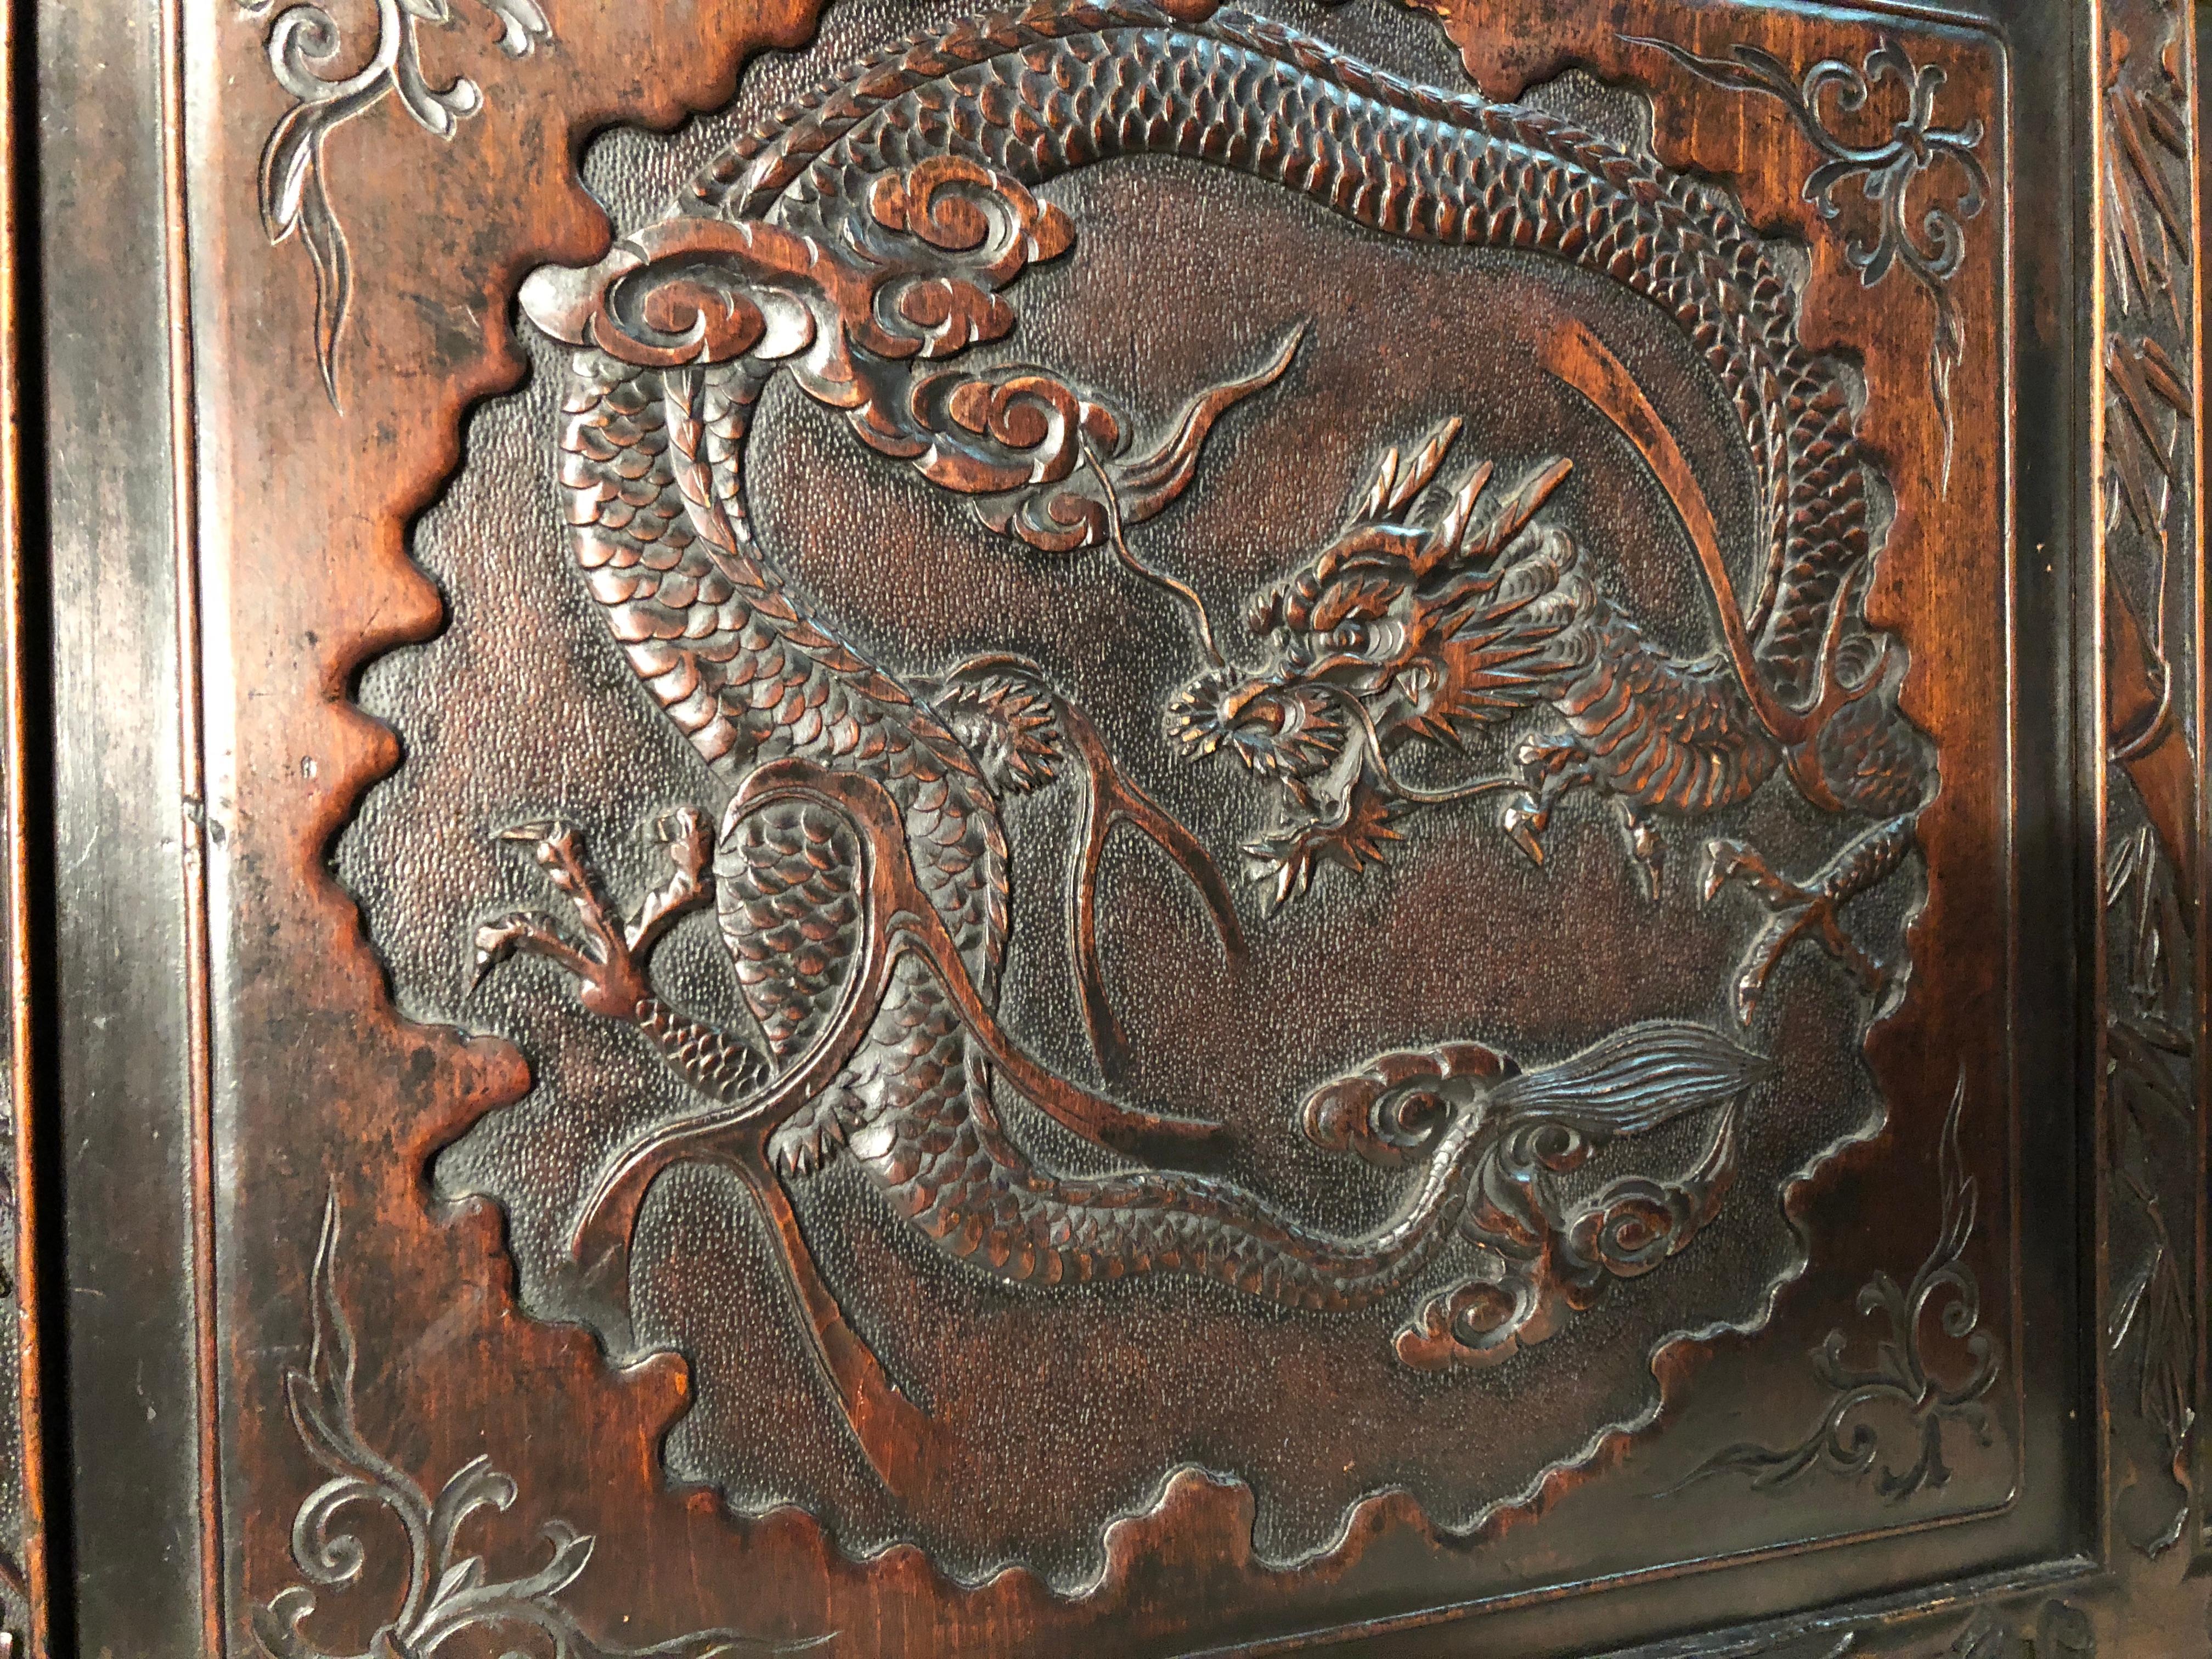 Japanese Dragon bench, hardwood exquisitely carved. In very good, vintage condition. The bench will be shipped from Germany. Shipping costs to Boston are included.